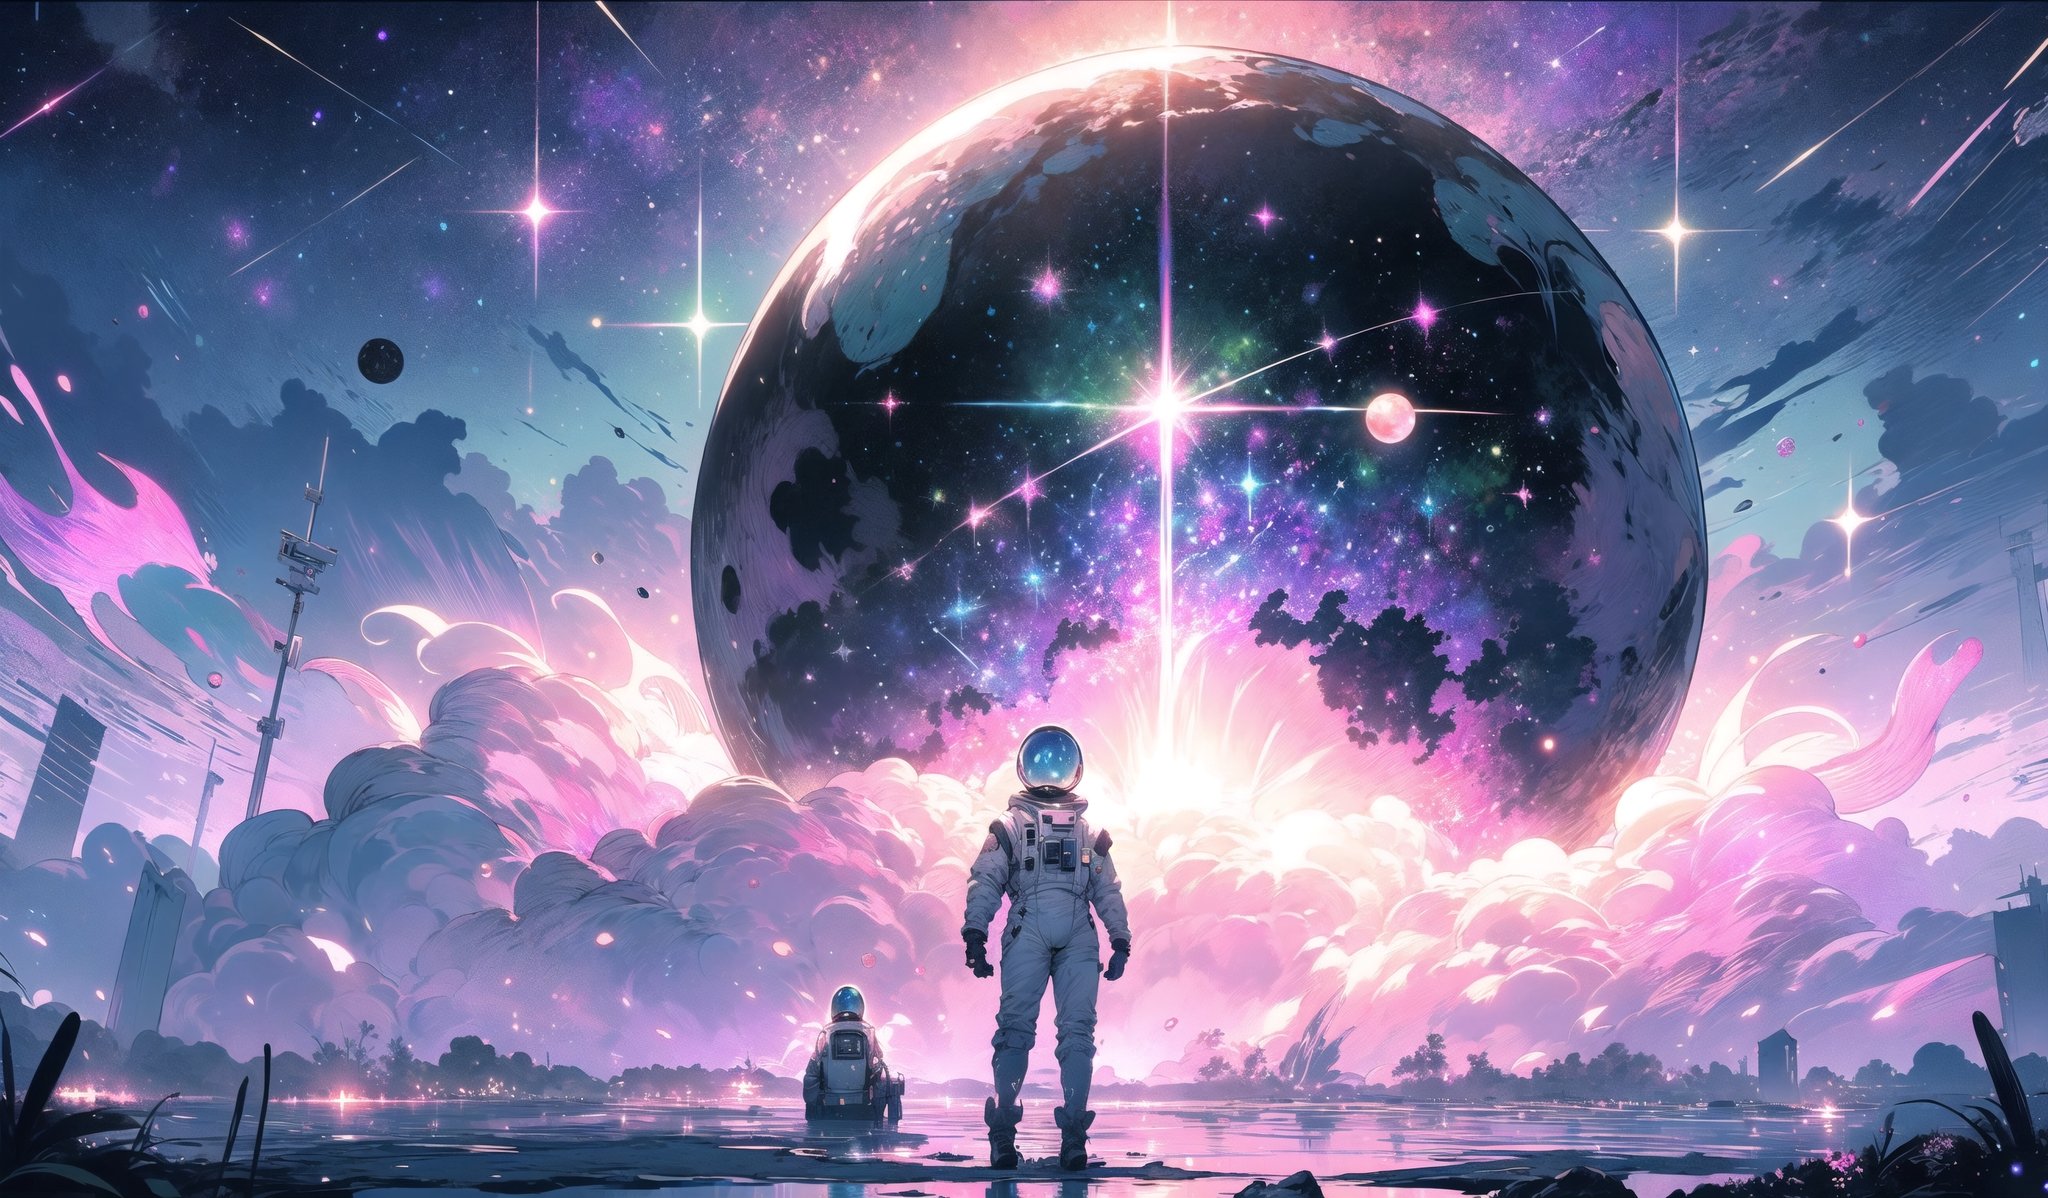 (masterpiece, best quality:1.2), pixiv, 8k, ultra-detailed, (multicolored background, colorful:1.3), gradient background, (pastel colors, pink theme, blue theme, green theme, purple theme:1.4), (Gradation color:1.2),

BREAK,

space odyssey, space, galaxy, milky way, star, planet, light particles, desert, satellite, (cloudy sky, fog:1.3, (scenery:1.4), wide shot,

BREAK,

space suit, space helmet,
standing, looking up,